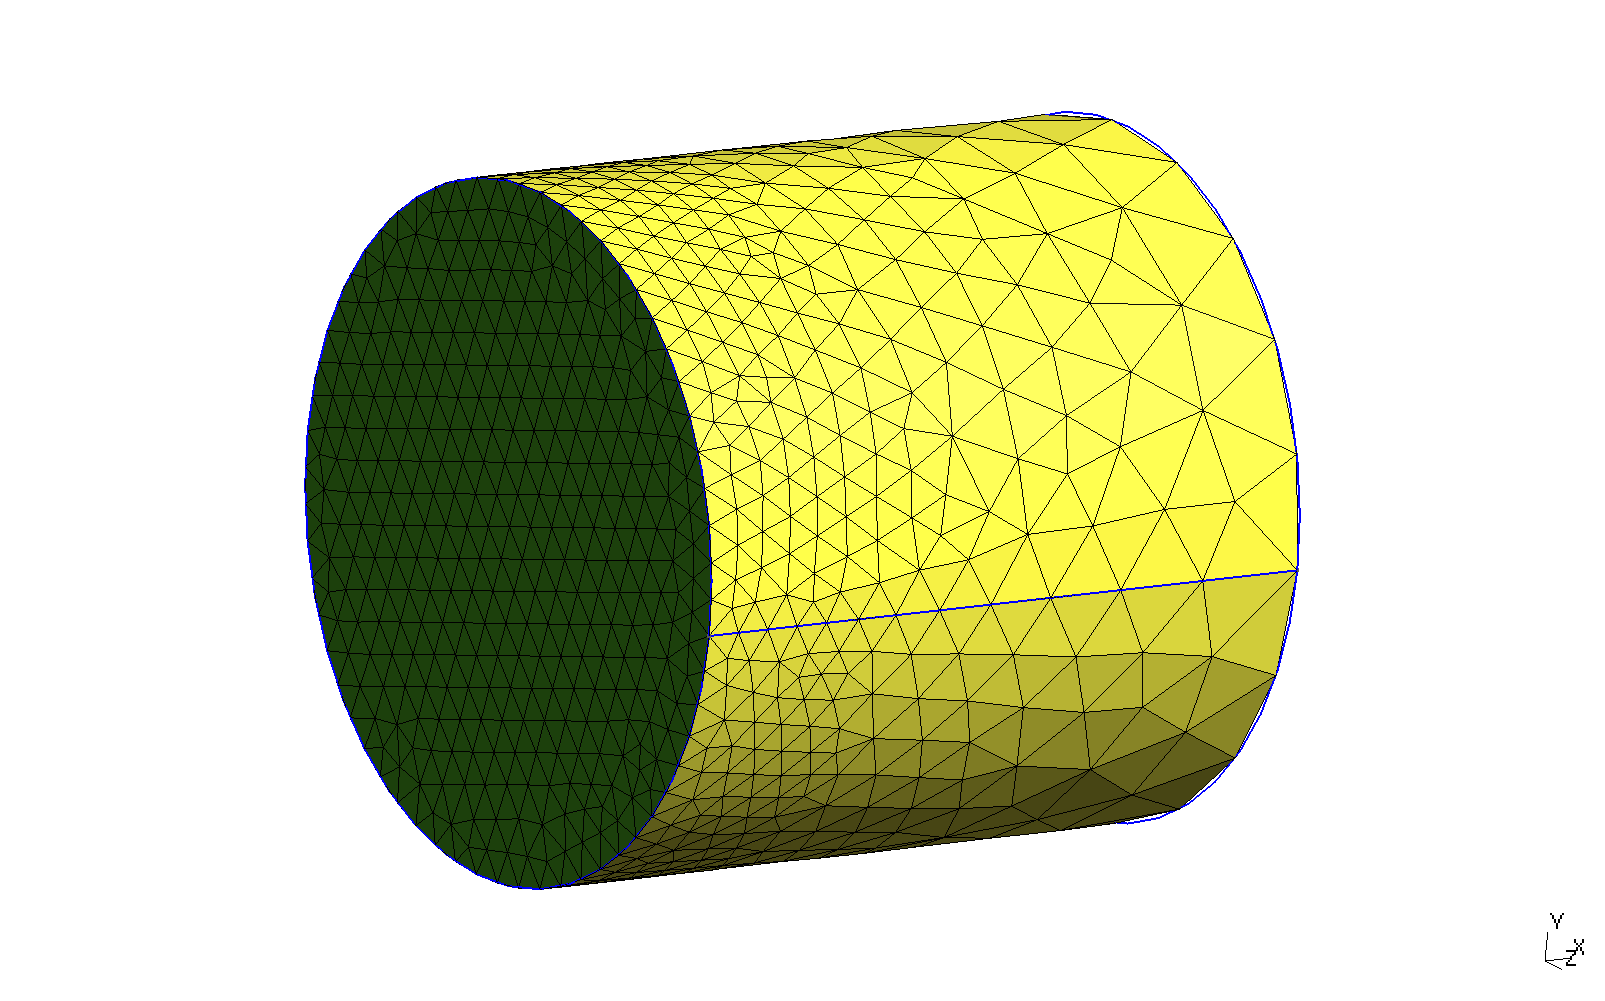 Locally-refined cylinder for a transient thermal problem.